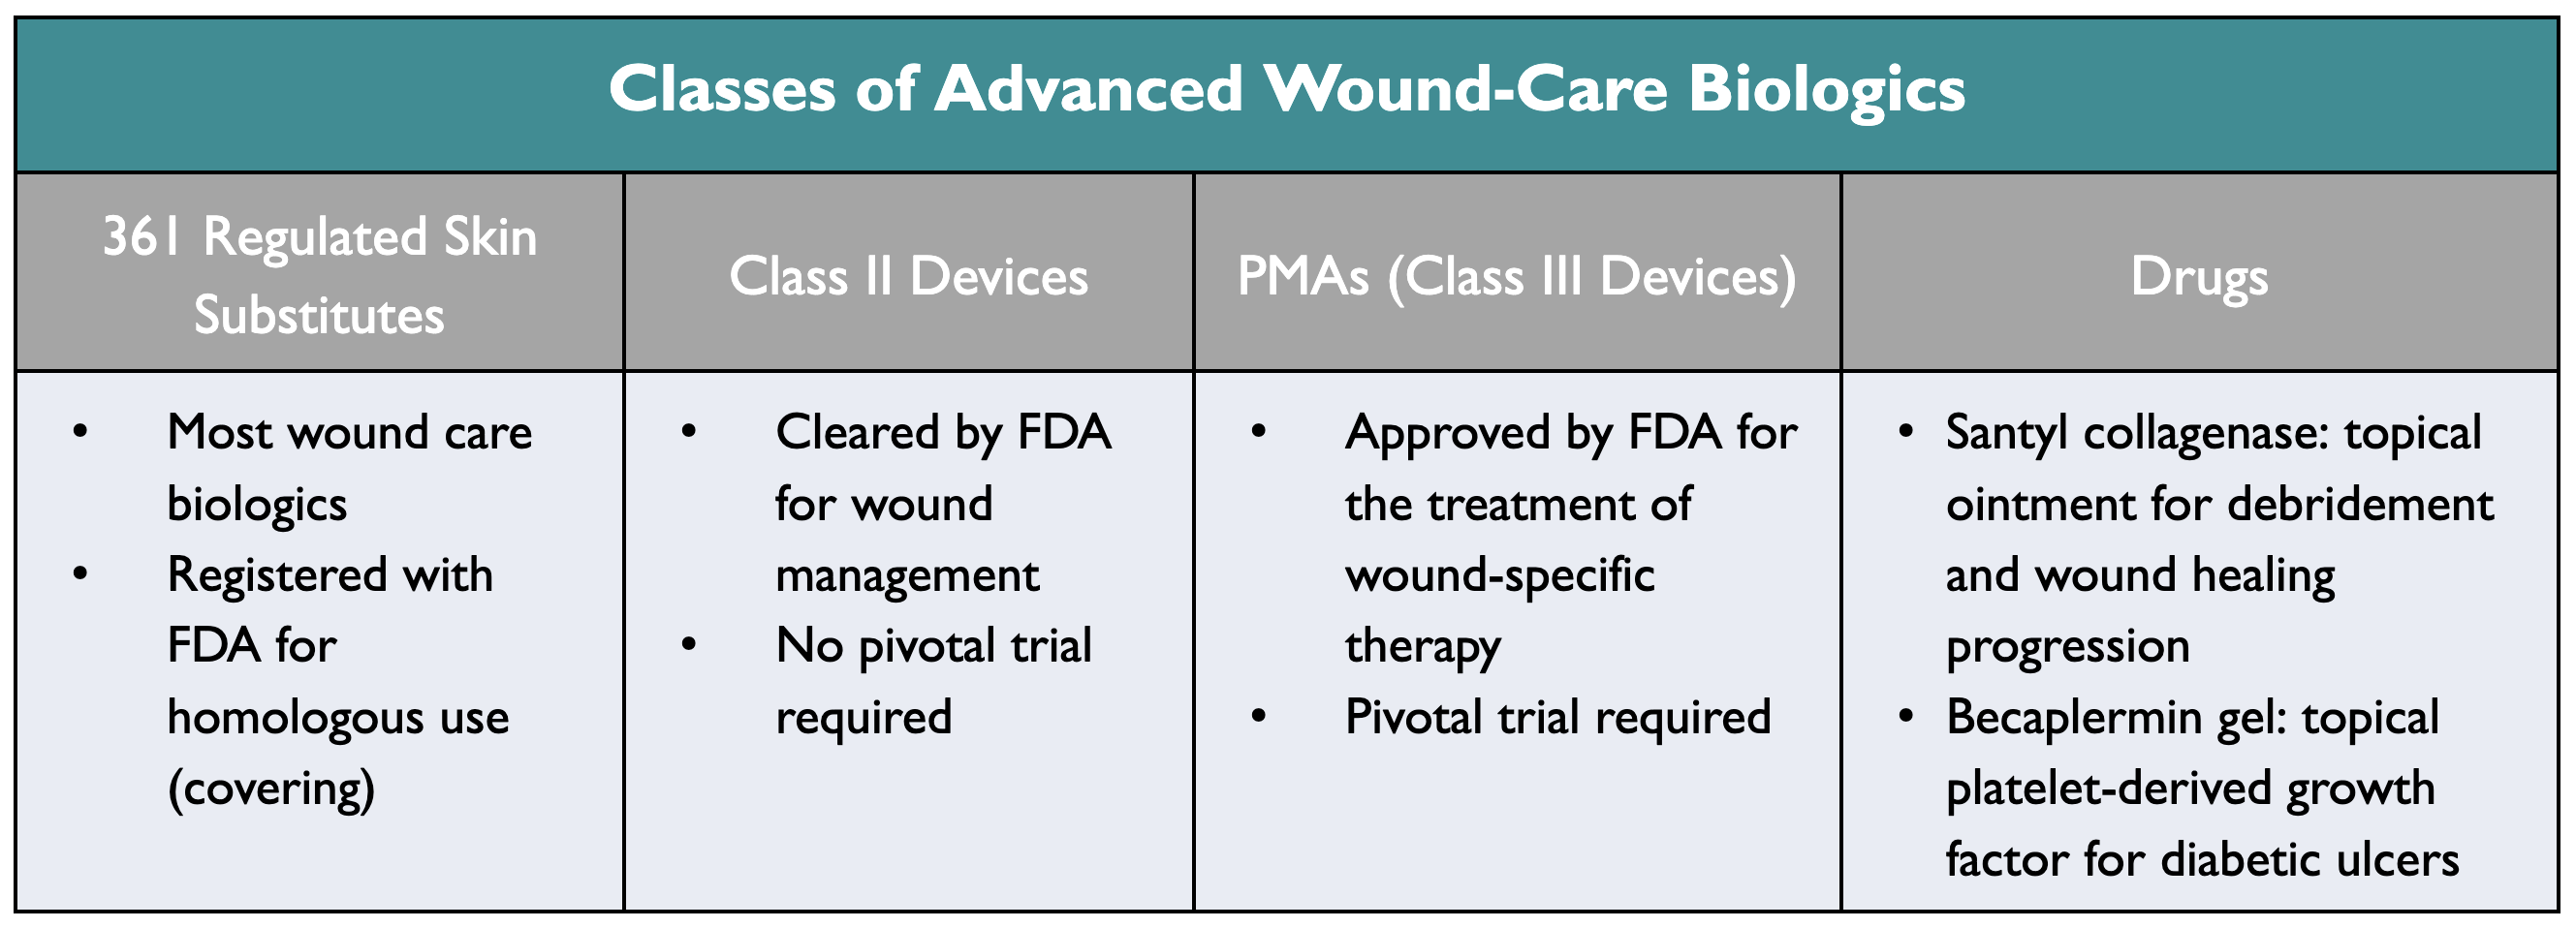 Chart Comparing Classes of Advanced Wound-Care Biologics